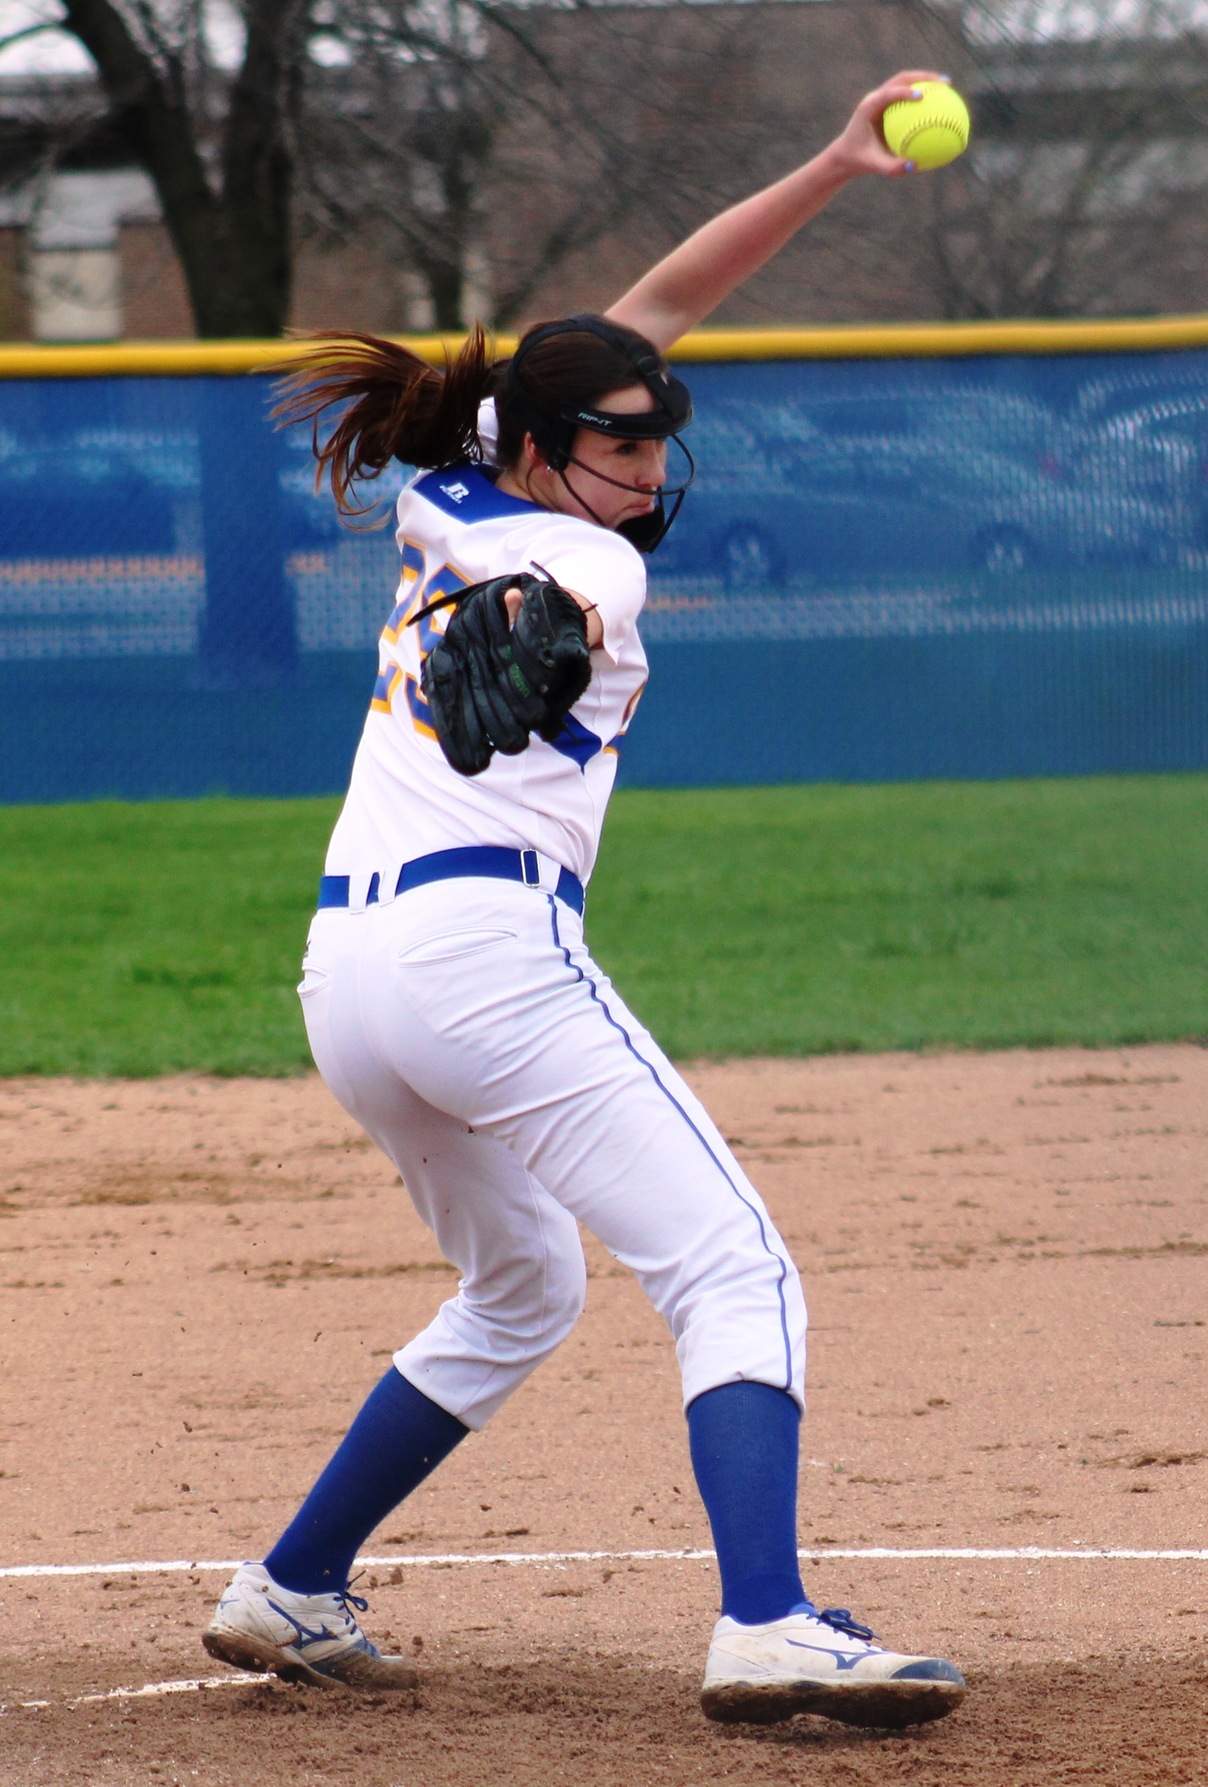 Hannah Dove throws a pitch against Ellsworth in first game of doubleheader on Thursday.